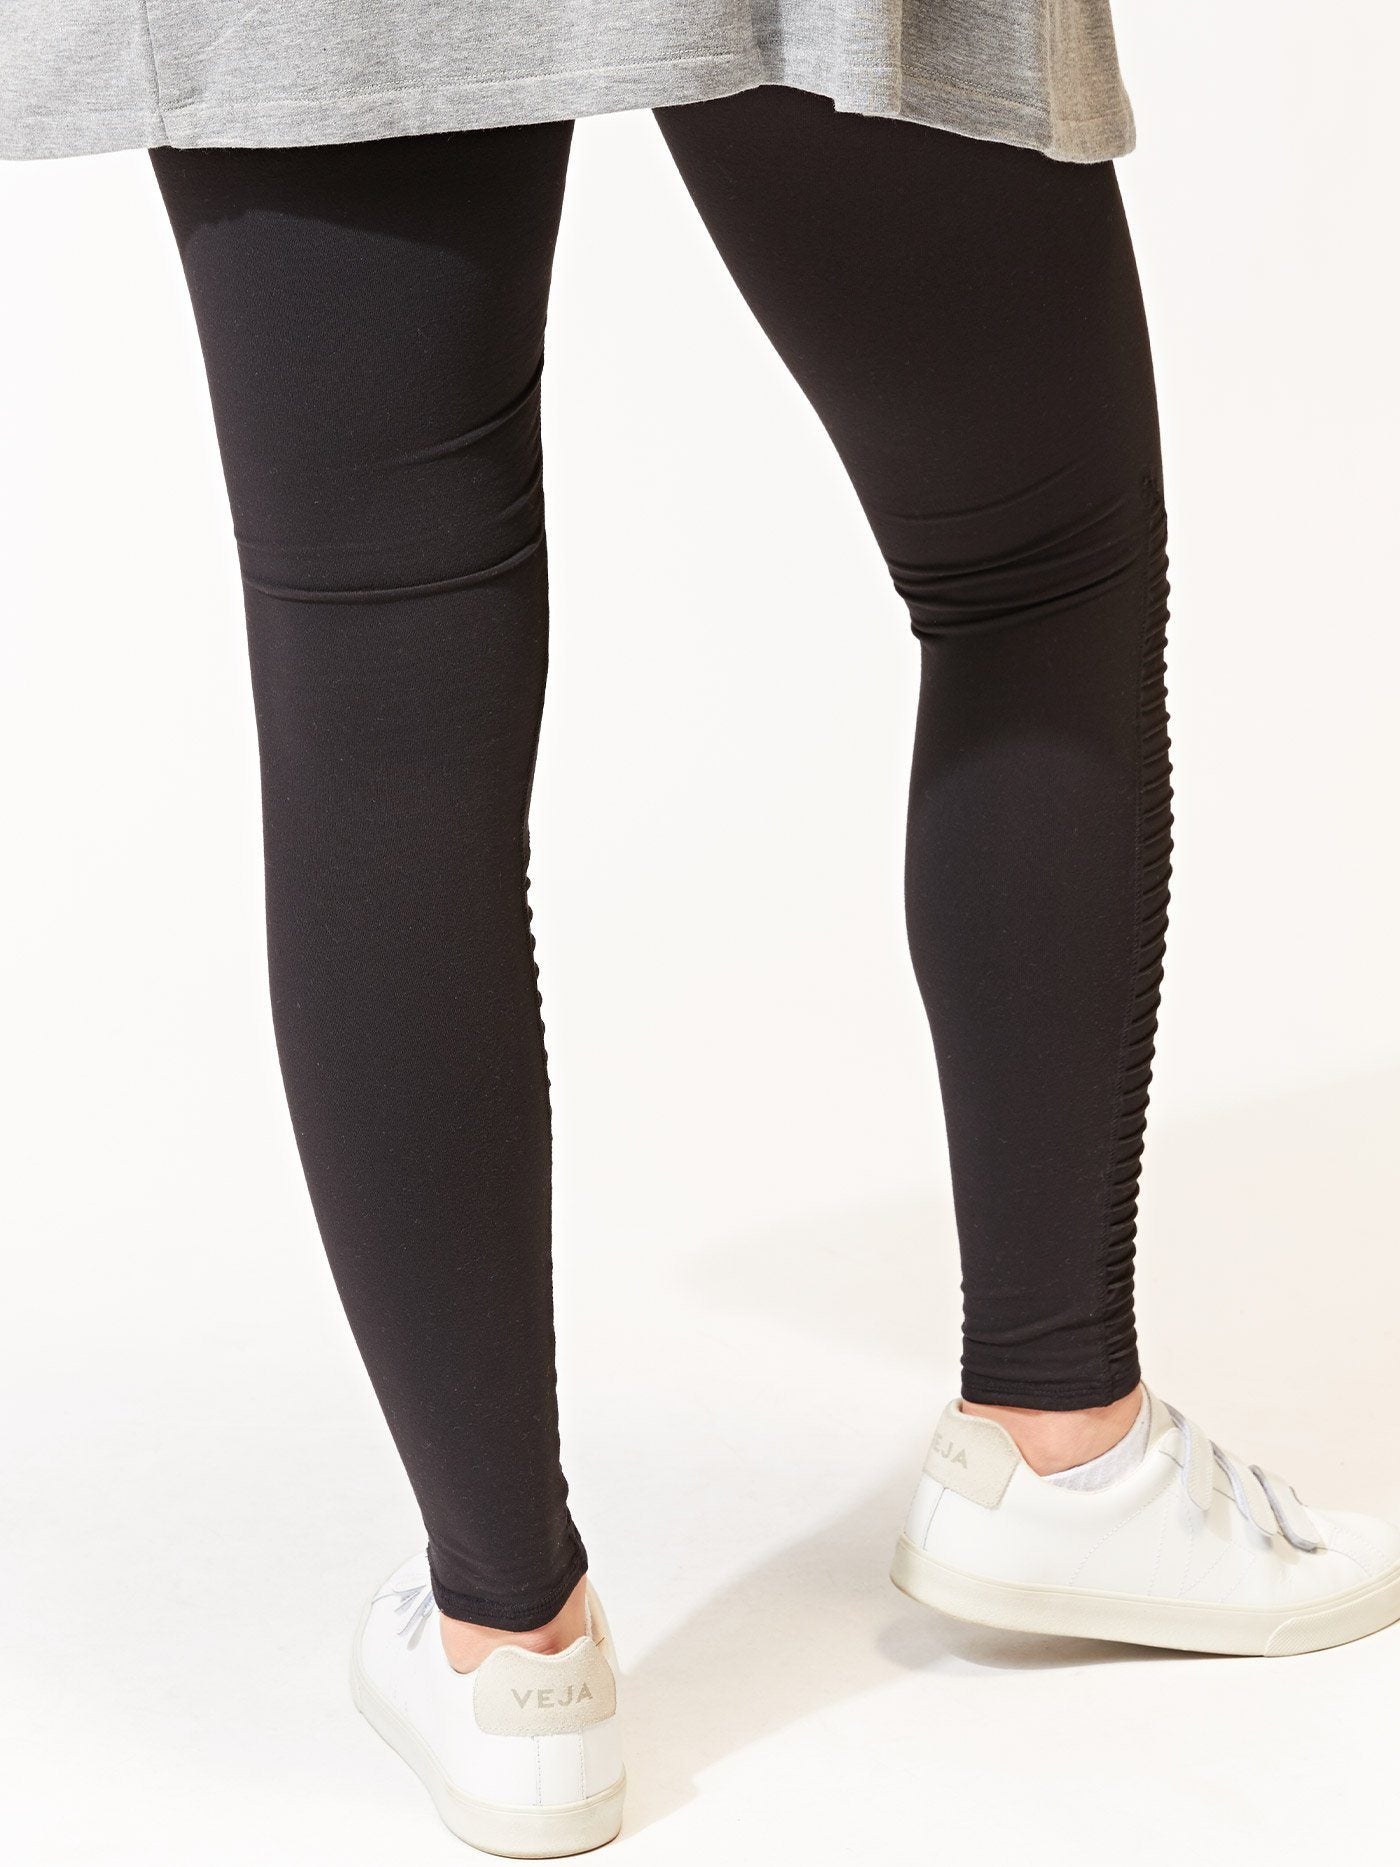 Twisted Threads Boutique - Zenana Mineral Washed Moto Leggings (Regular and  Plus). These wide band moto leggings are super soft and super comfy. If in  between sizes, size up. Made of high